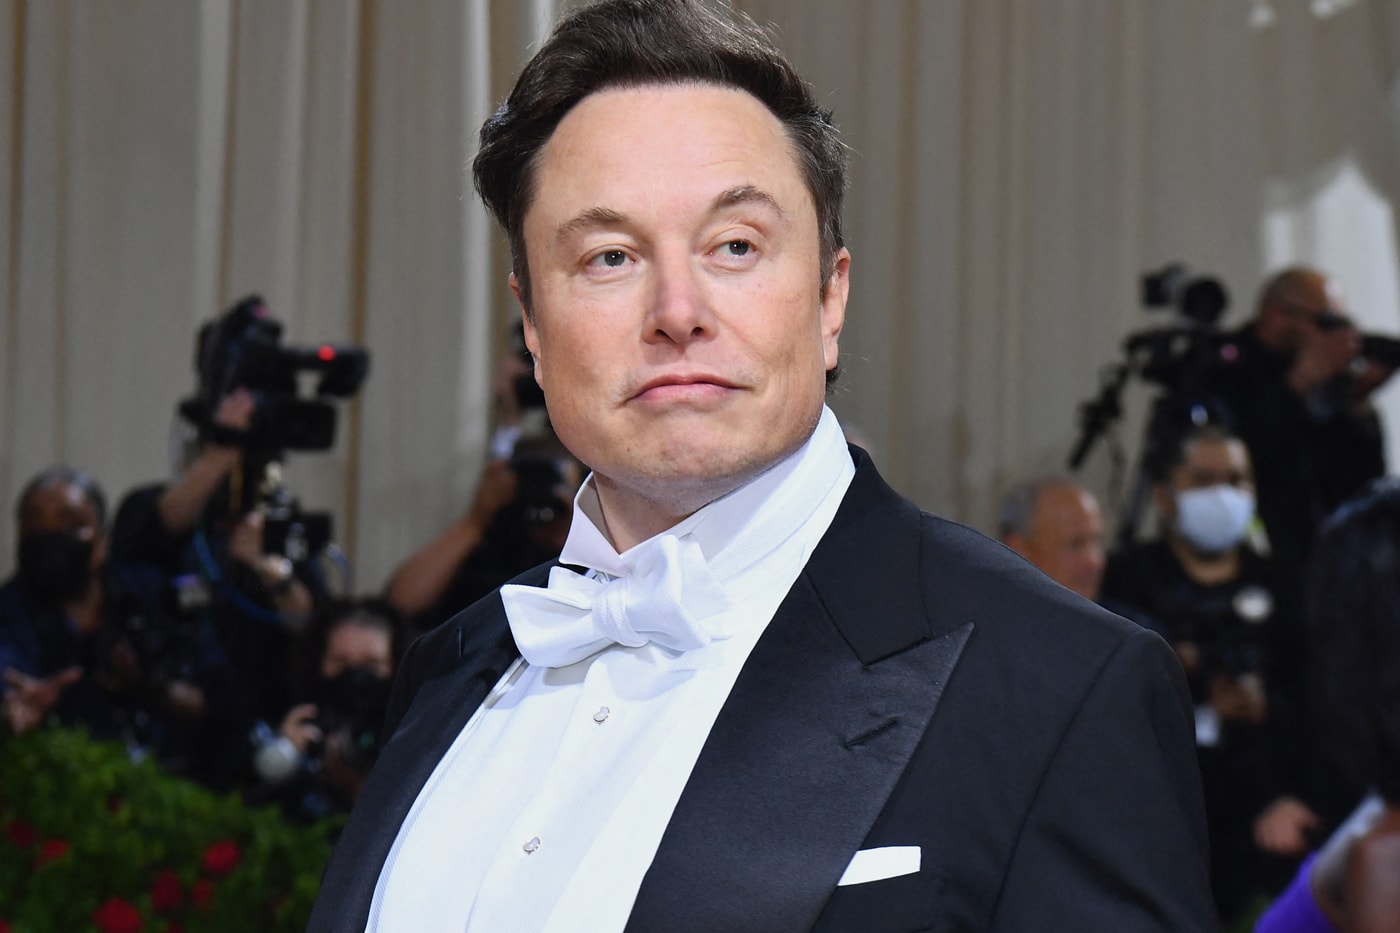 Elon Musk Biopic In the Works From A24 Darren Aronofsky